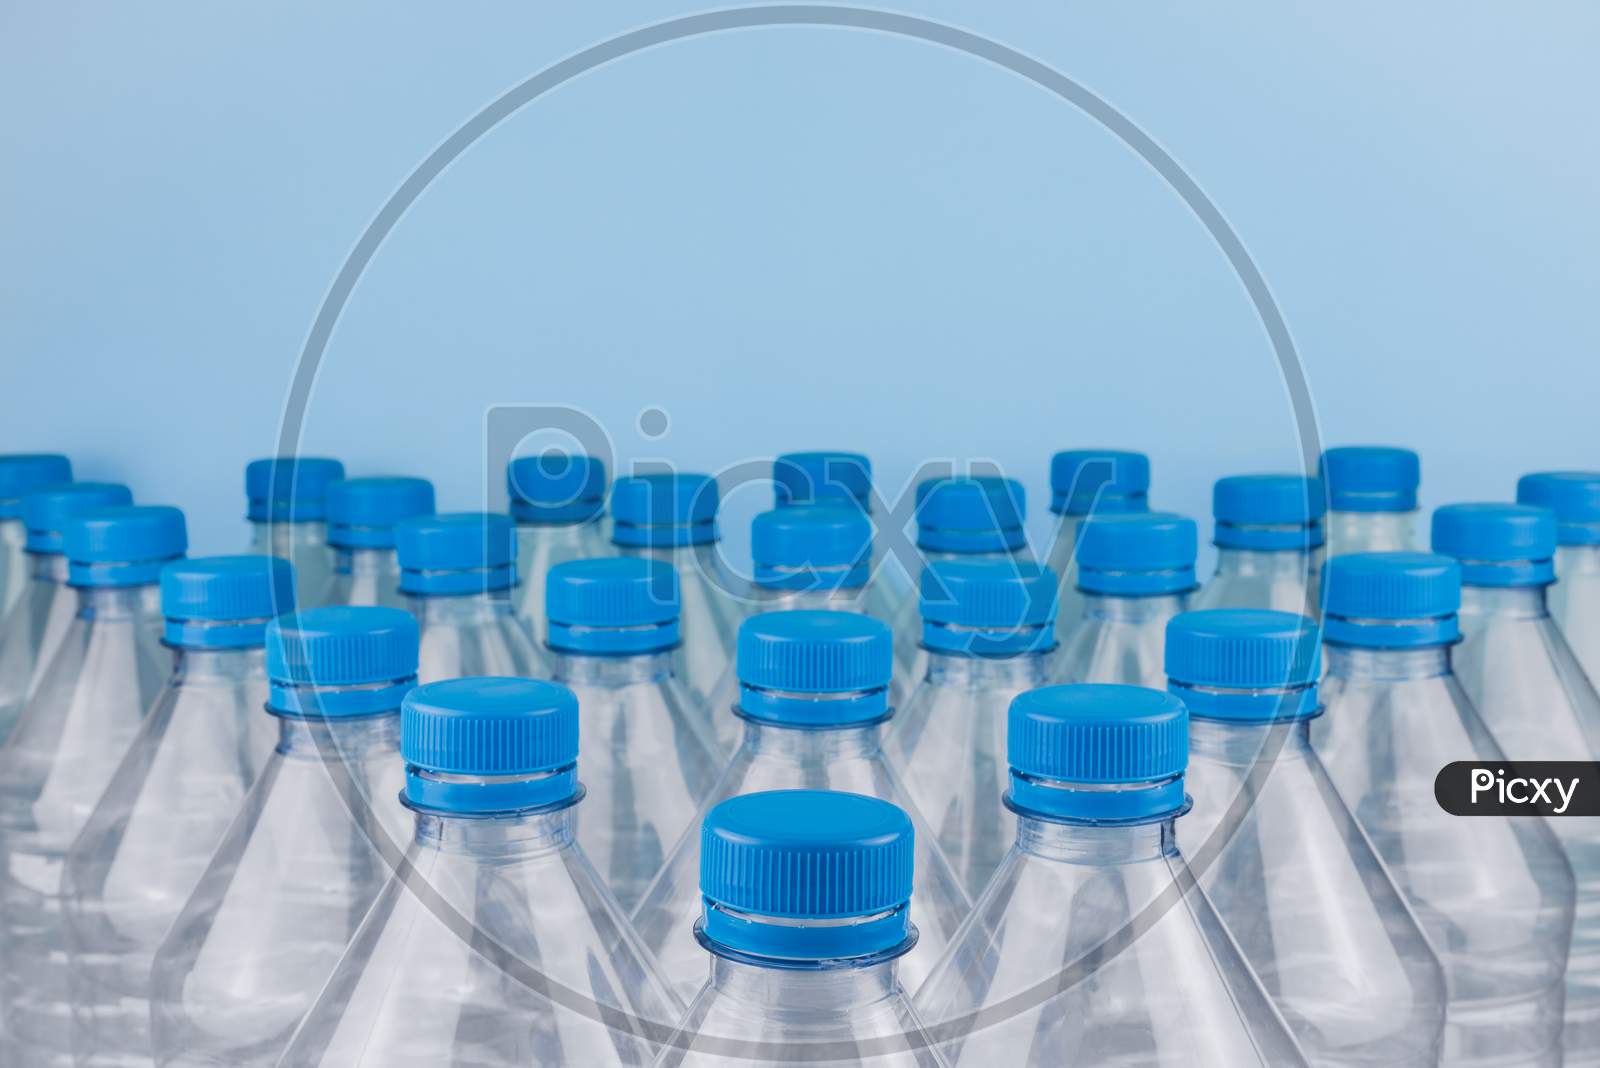 Empty Clear Plastic Bottles With Caps Stacked On A Blue Background. Recycling And Environment Concept.